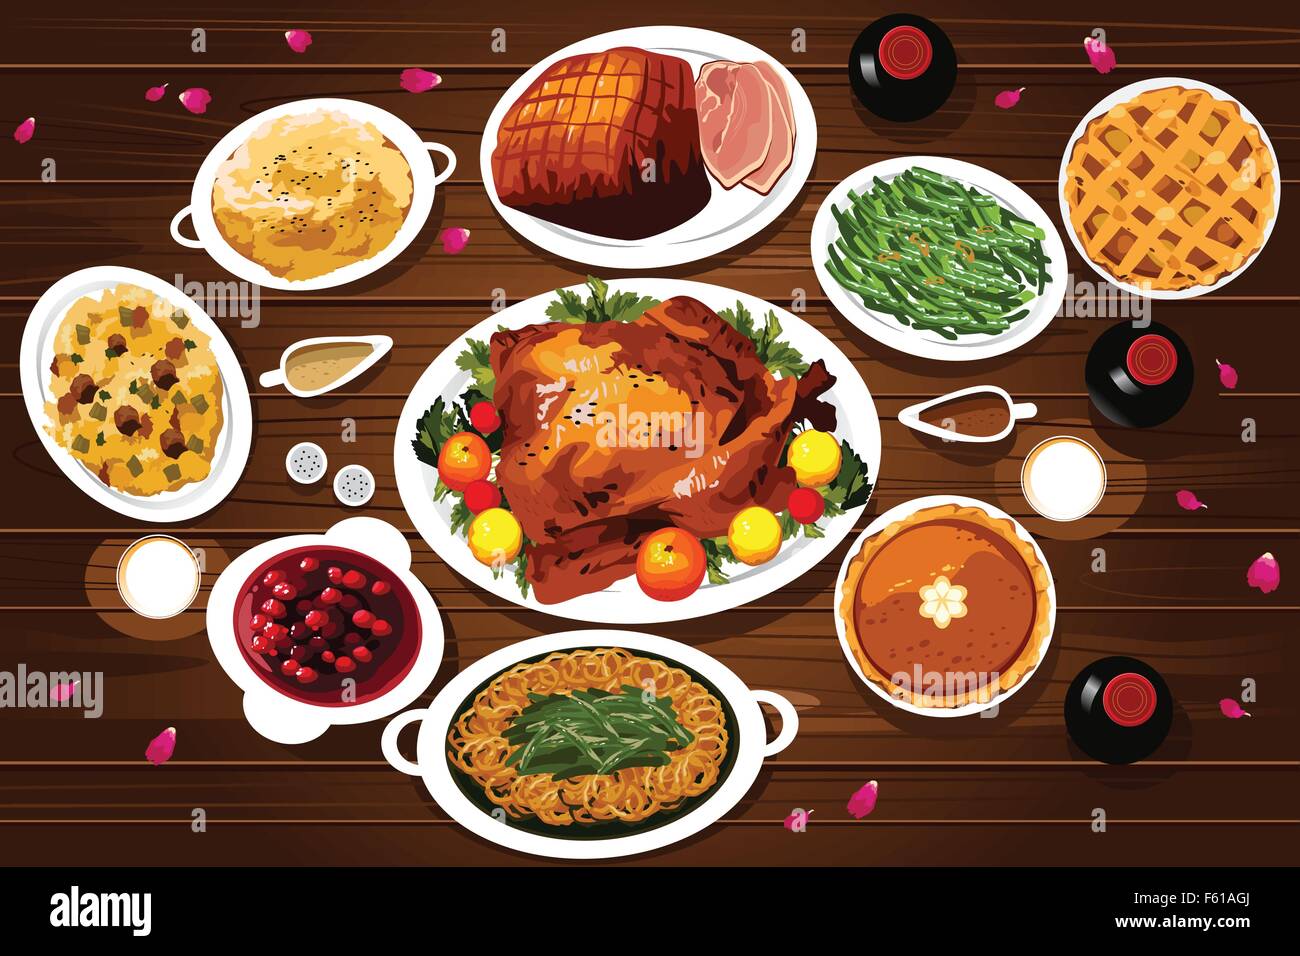 A vector illustration of food of thanksgiving dinner on the table viewed from above Stock Vector